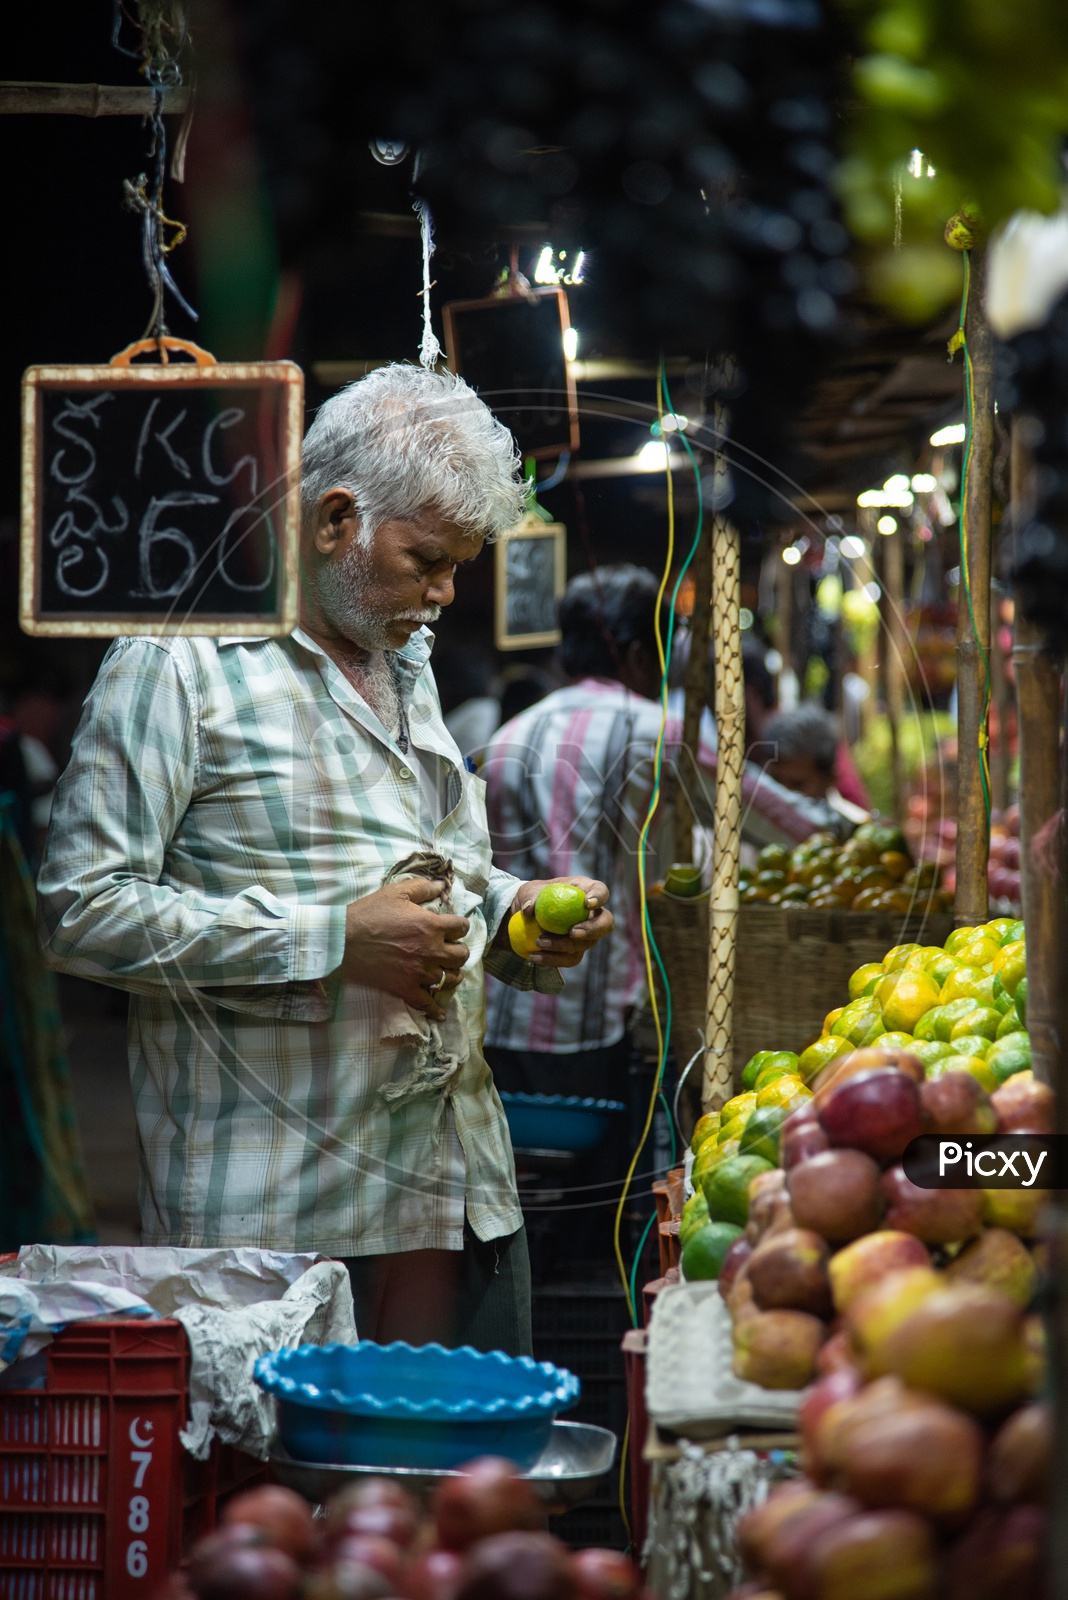 A fruit vendor inspecting his fruit stock as he puts them for sale.